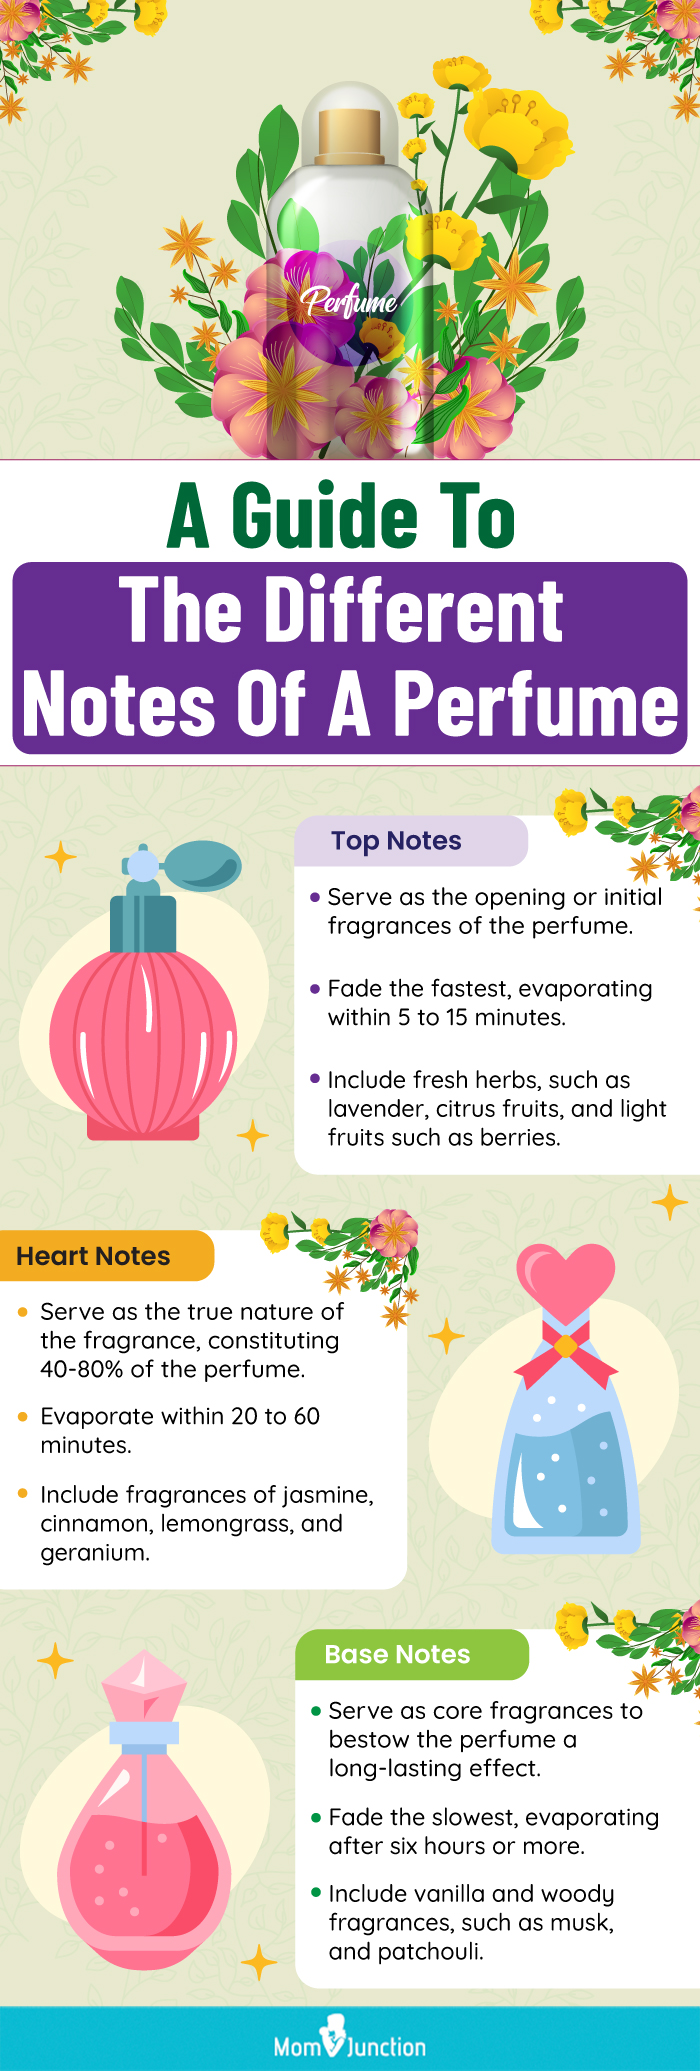 A Guide To The Different Notes Of A Perfume (infographic)